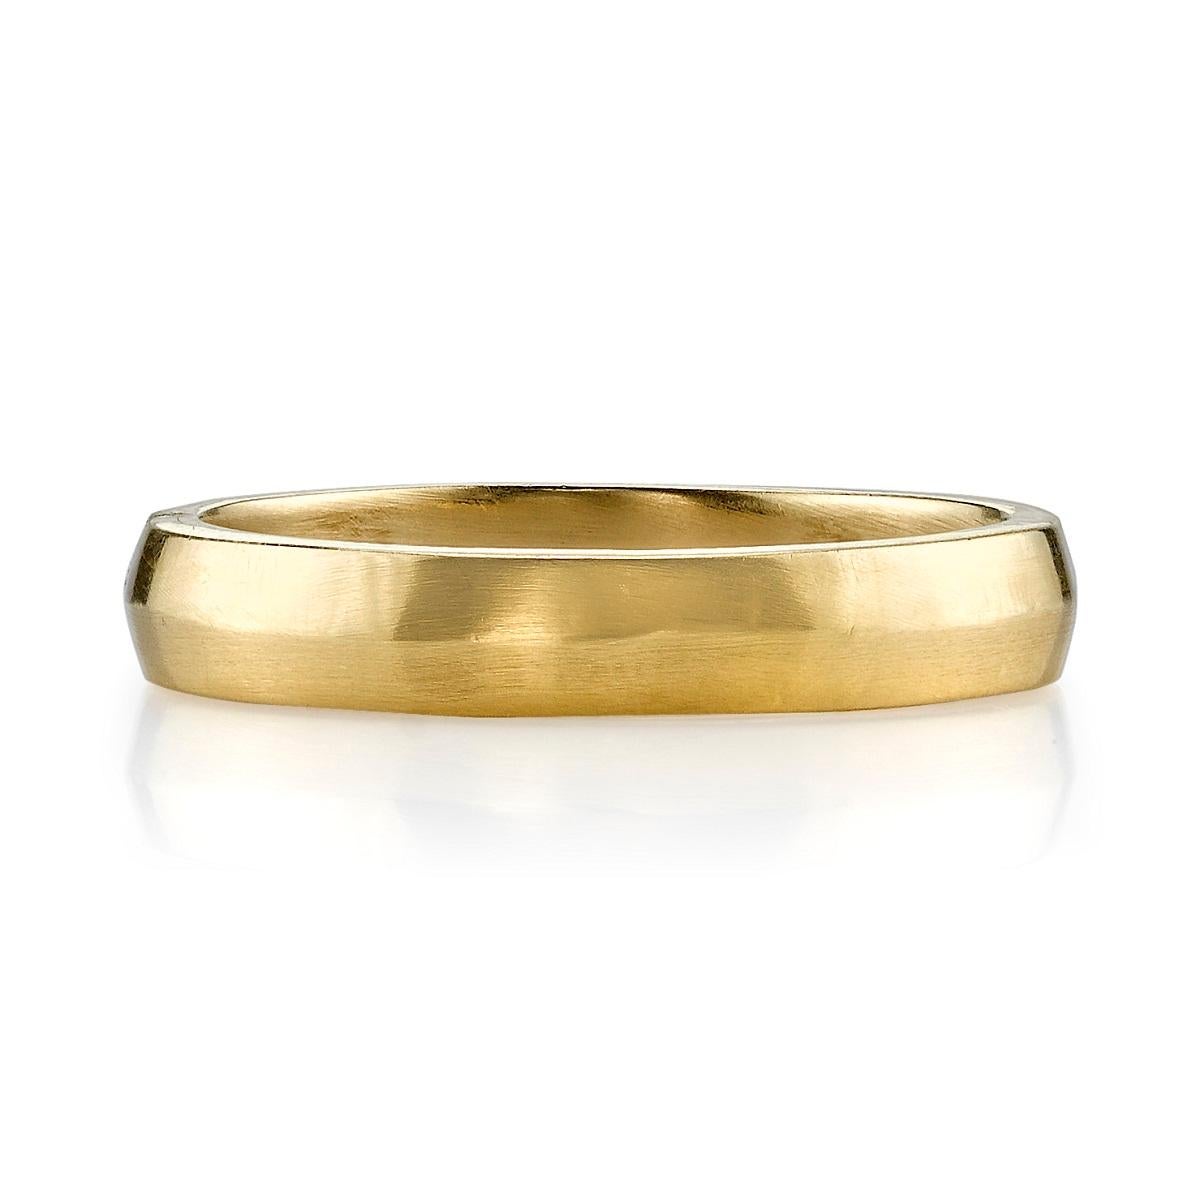 Handcrafted 4mm satin finish men's band in 18k gold. Band is available in yellow, rose and champagne white gold. 

Our jewelry is made locally in Los Angeles and most pieces are made to order. For these made-to-order items, please allow 8-10 weeks